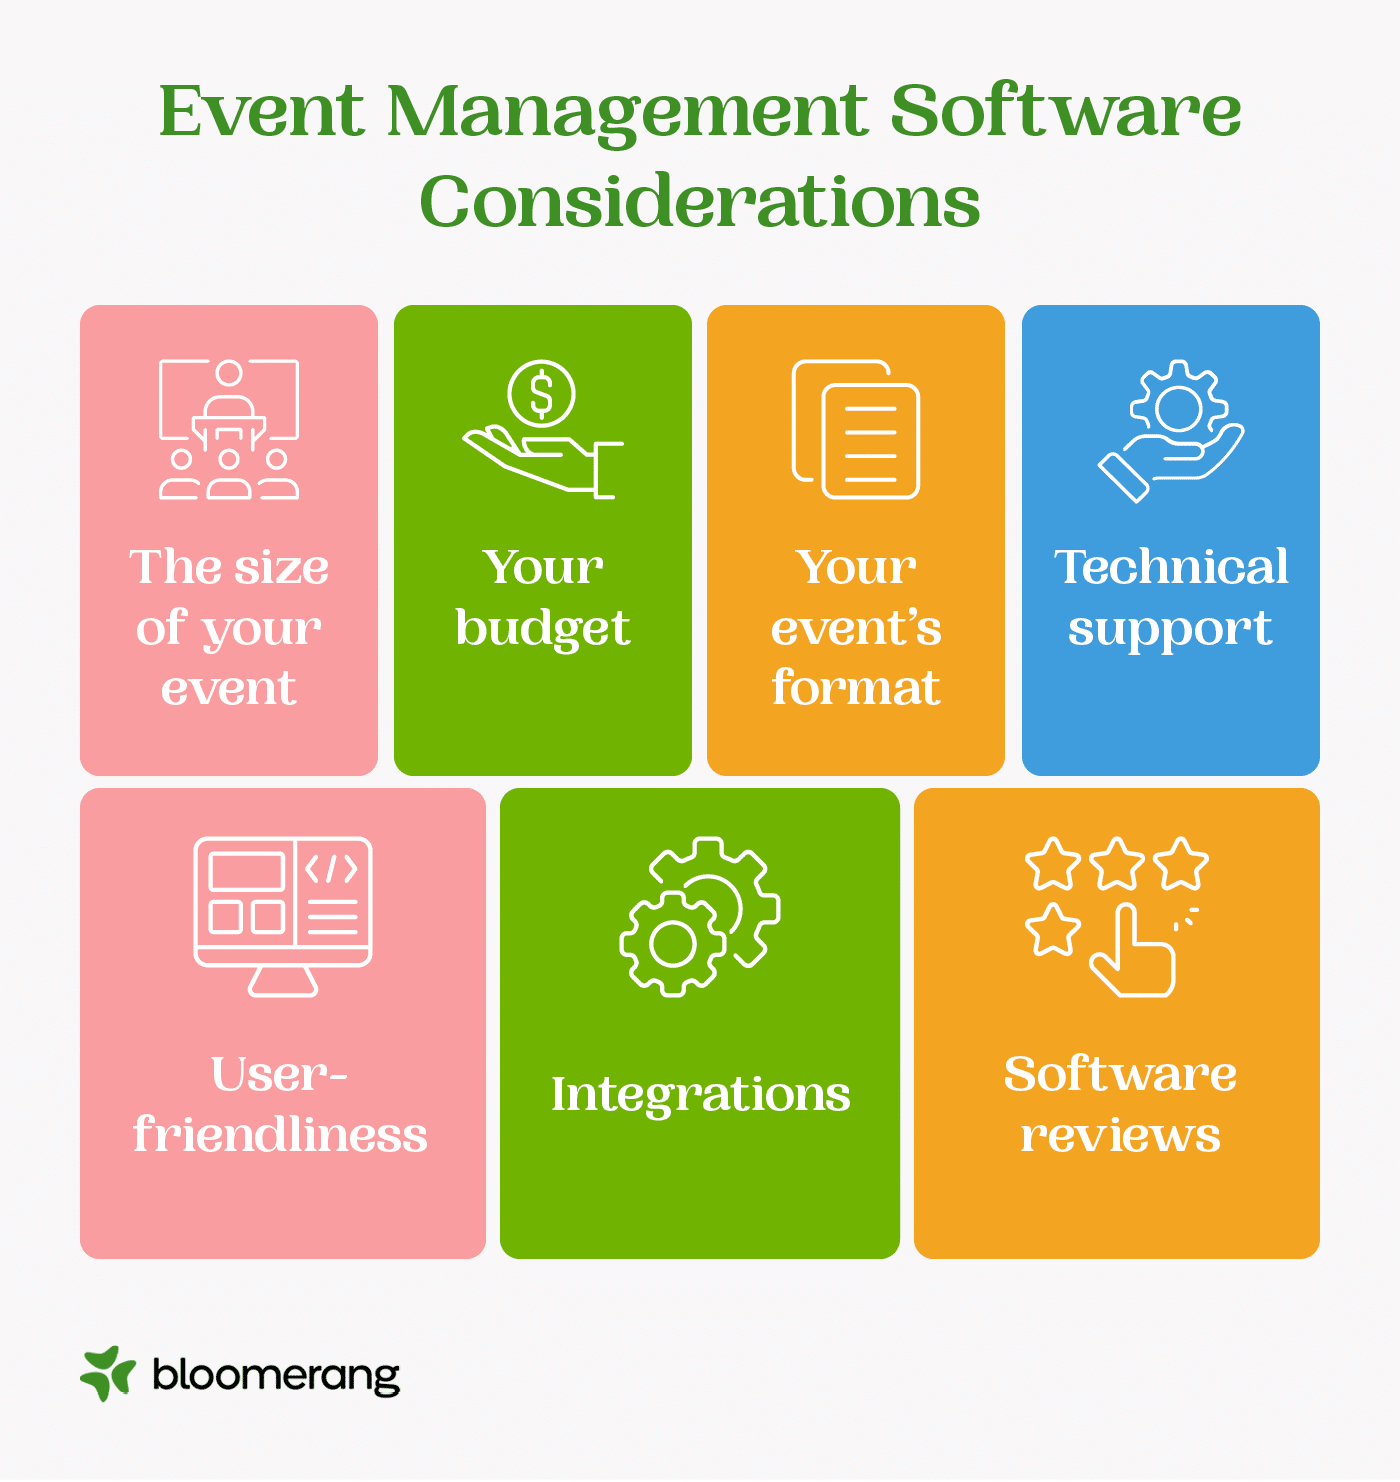 Event management software considerations (described in the list below) 